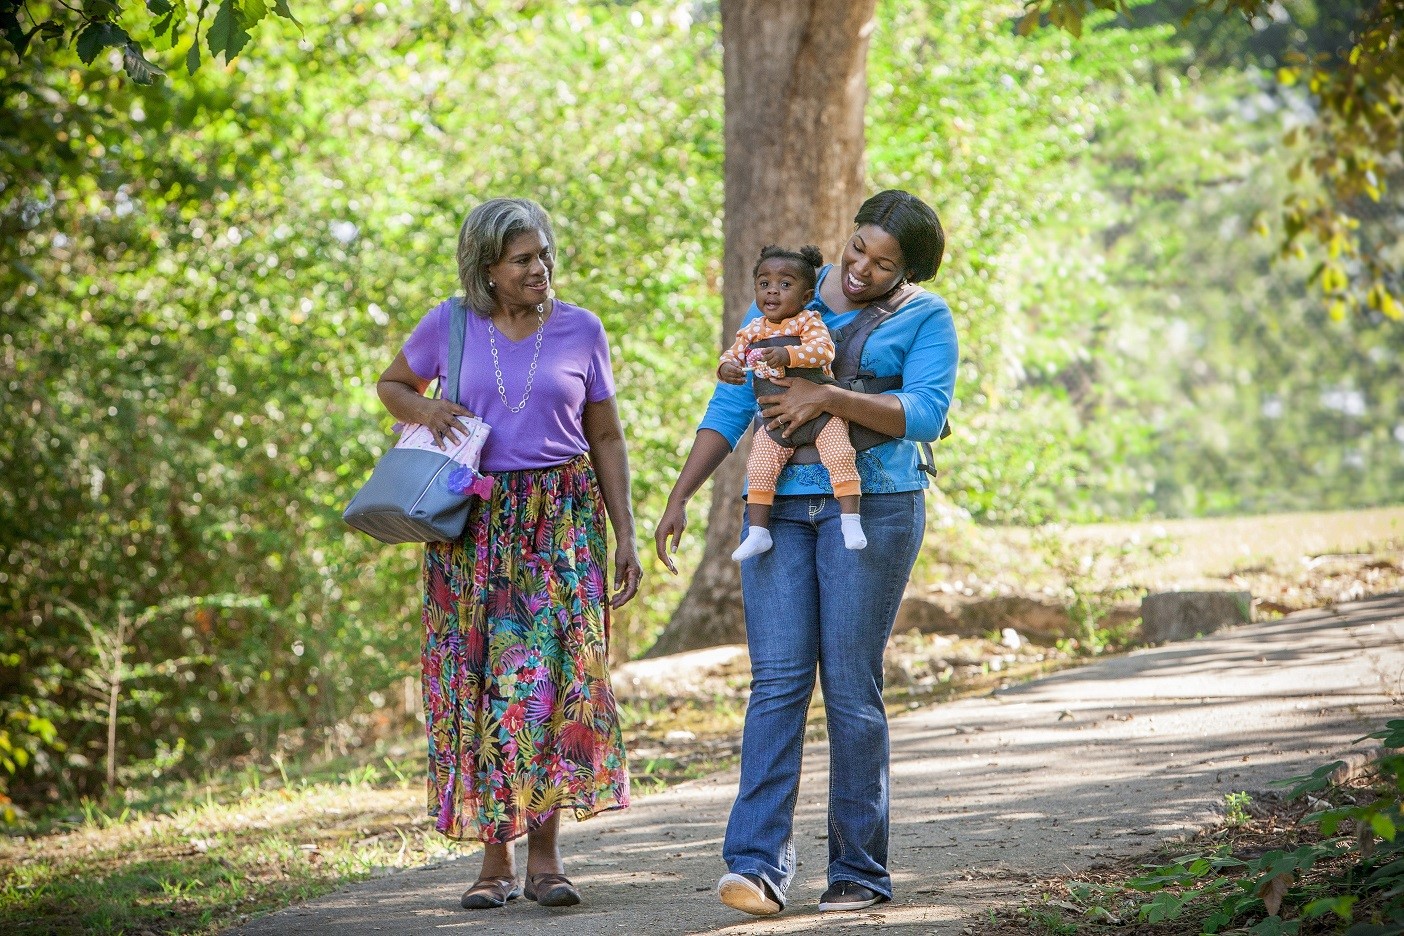 Two women and a baby walking together in a park.